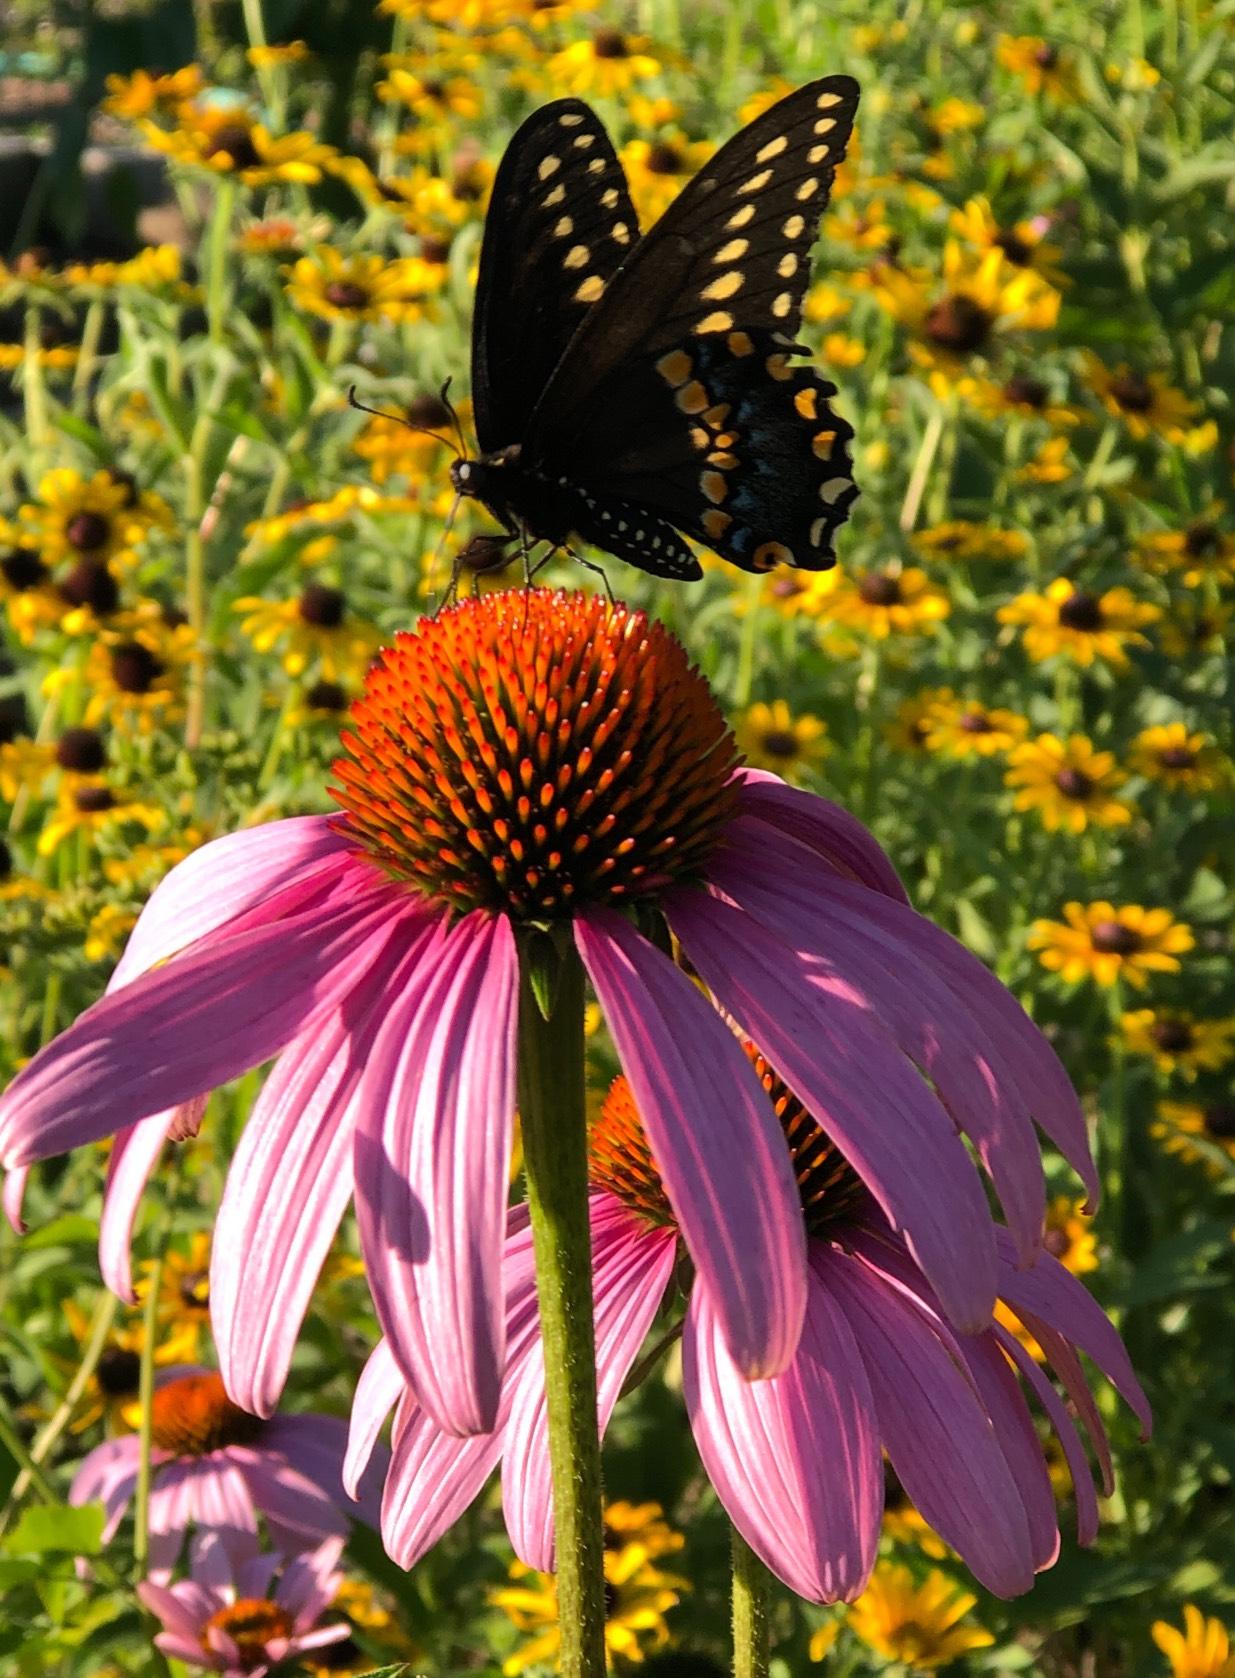 Native plants provide food and habitat for pollinators, in a way that "classic" garden plants don't. (Patty Wetli / WTTW News)